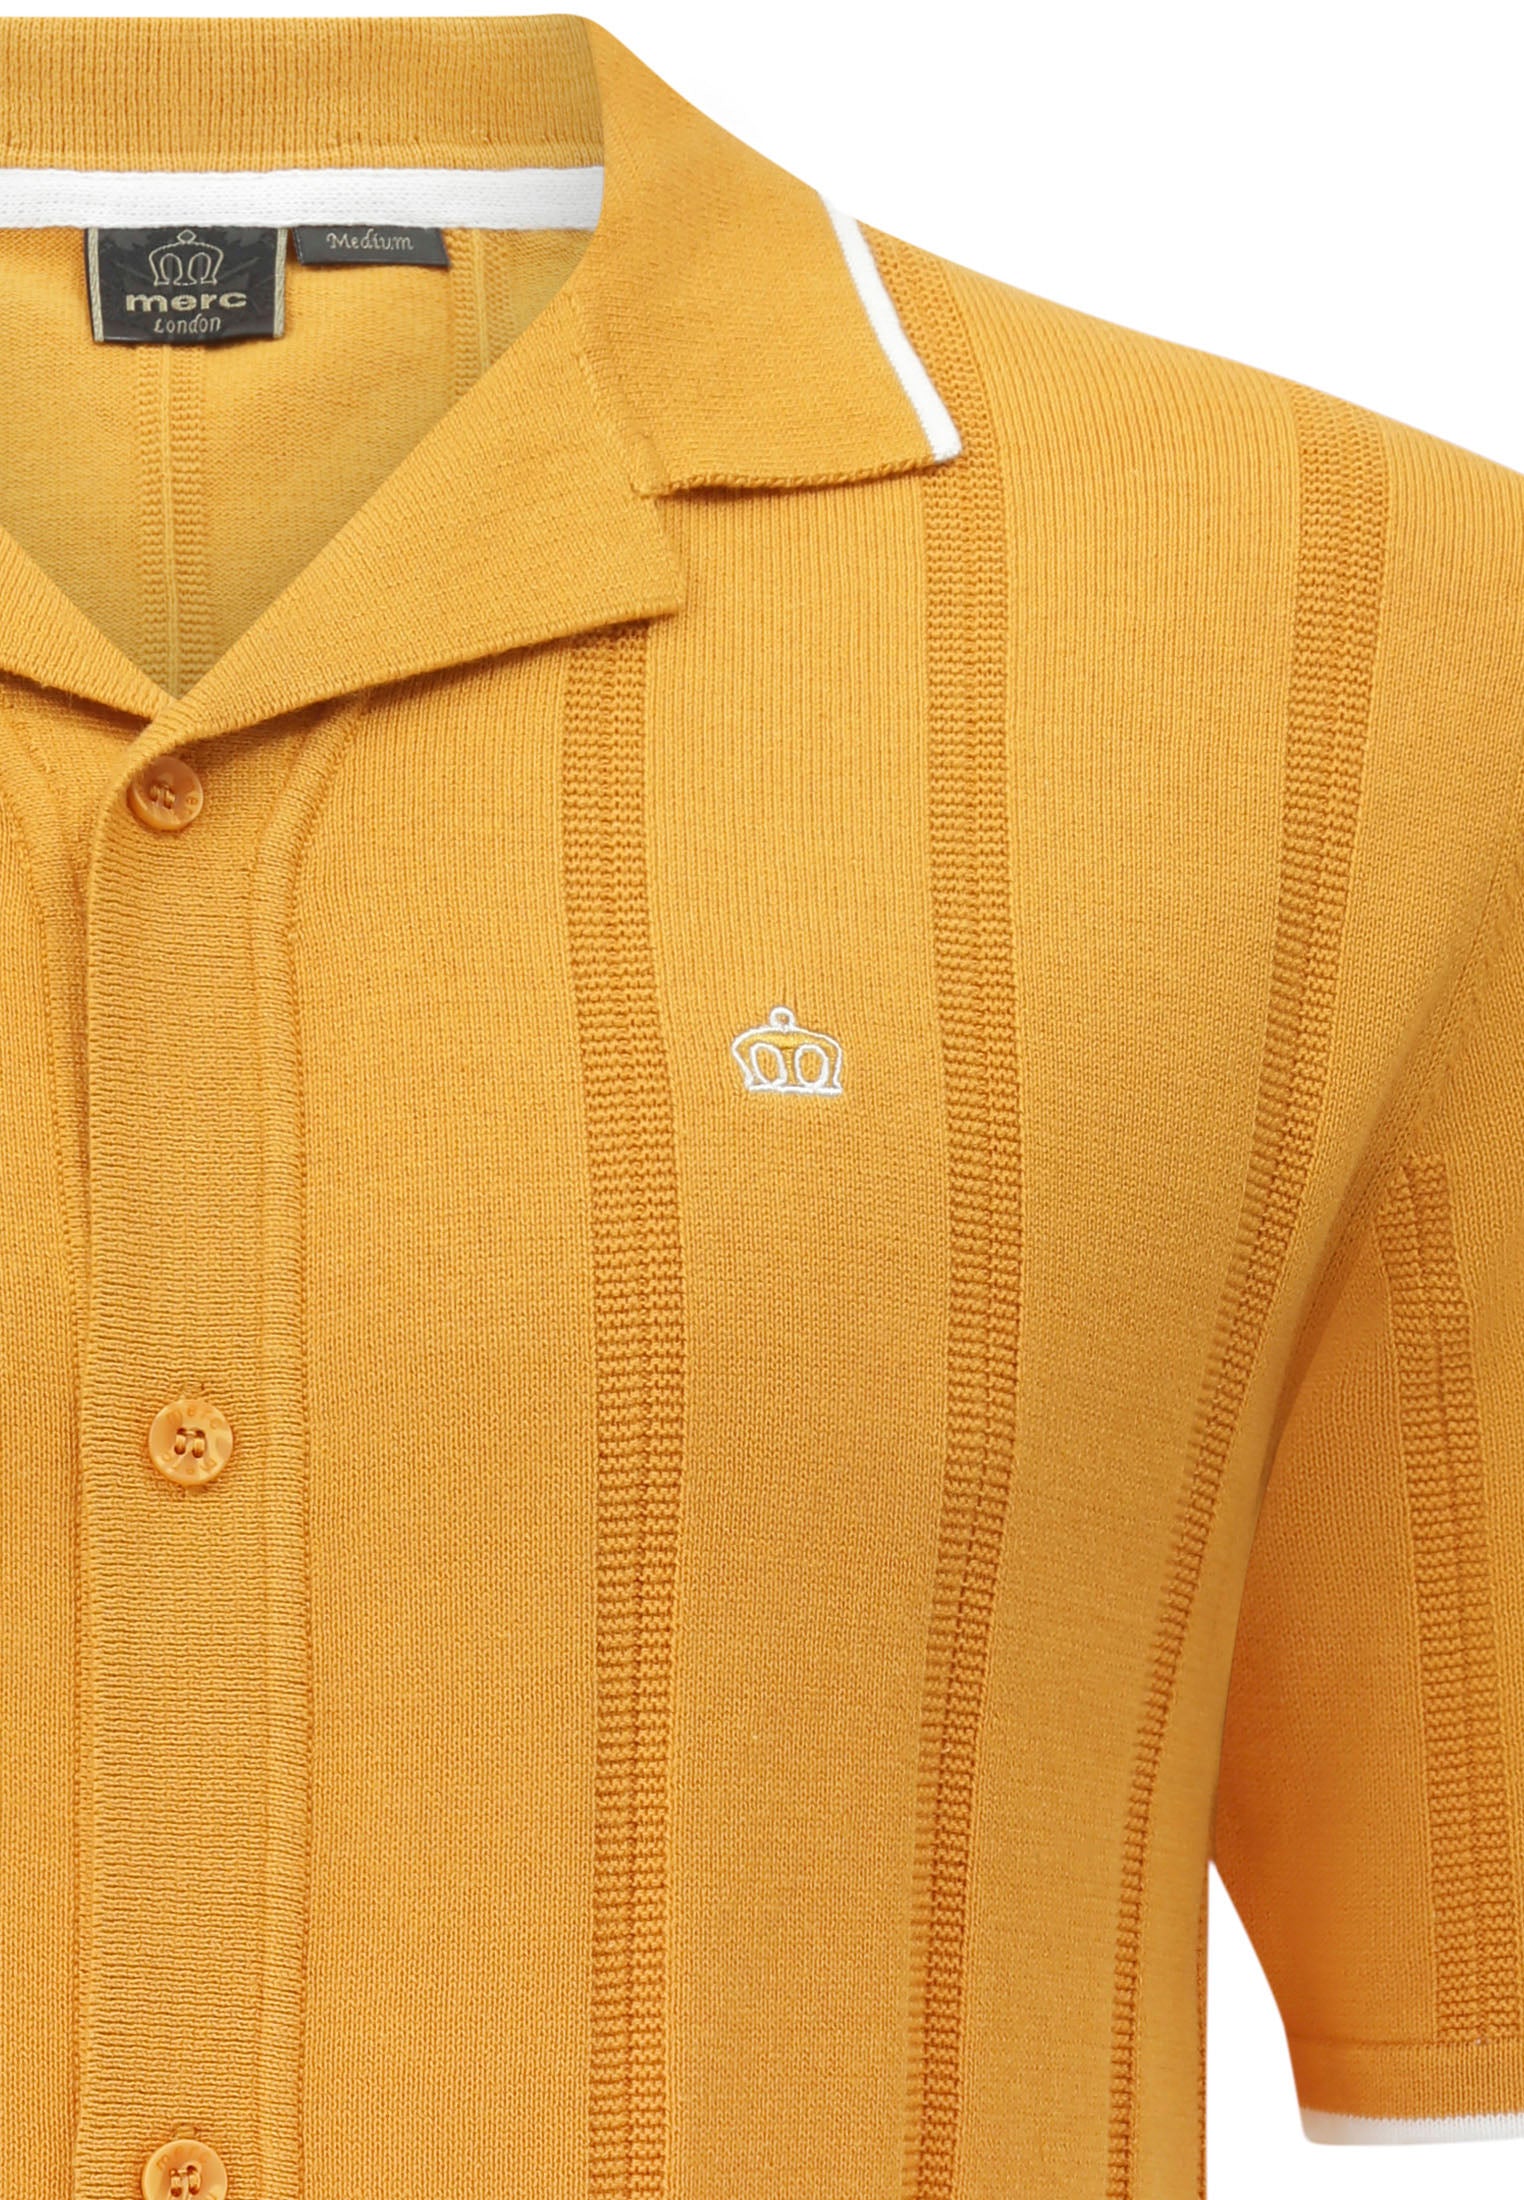 Camp Collar Knitted Polo Shirt in Yellow by Merc